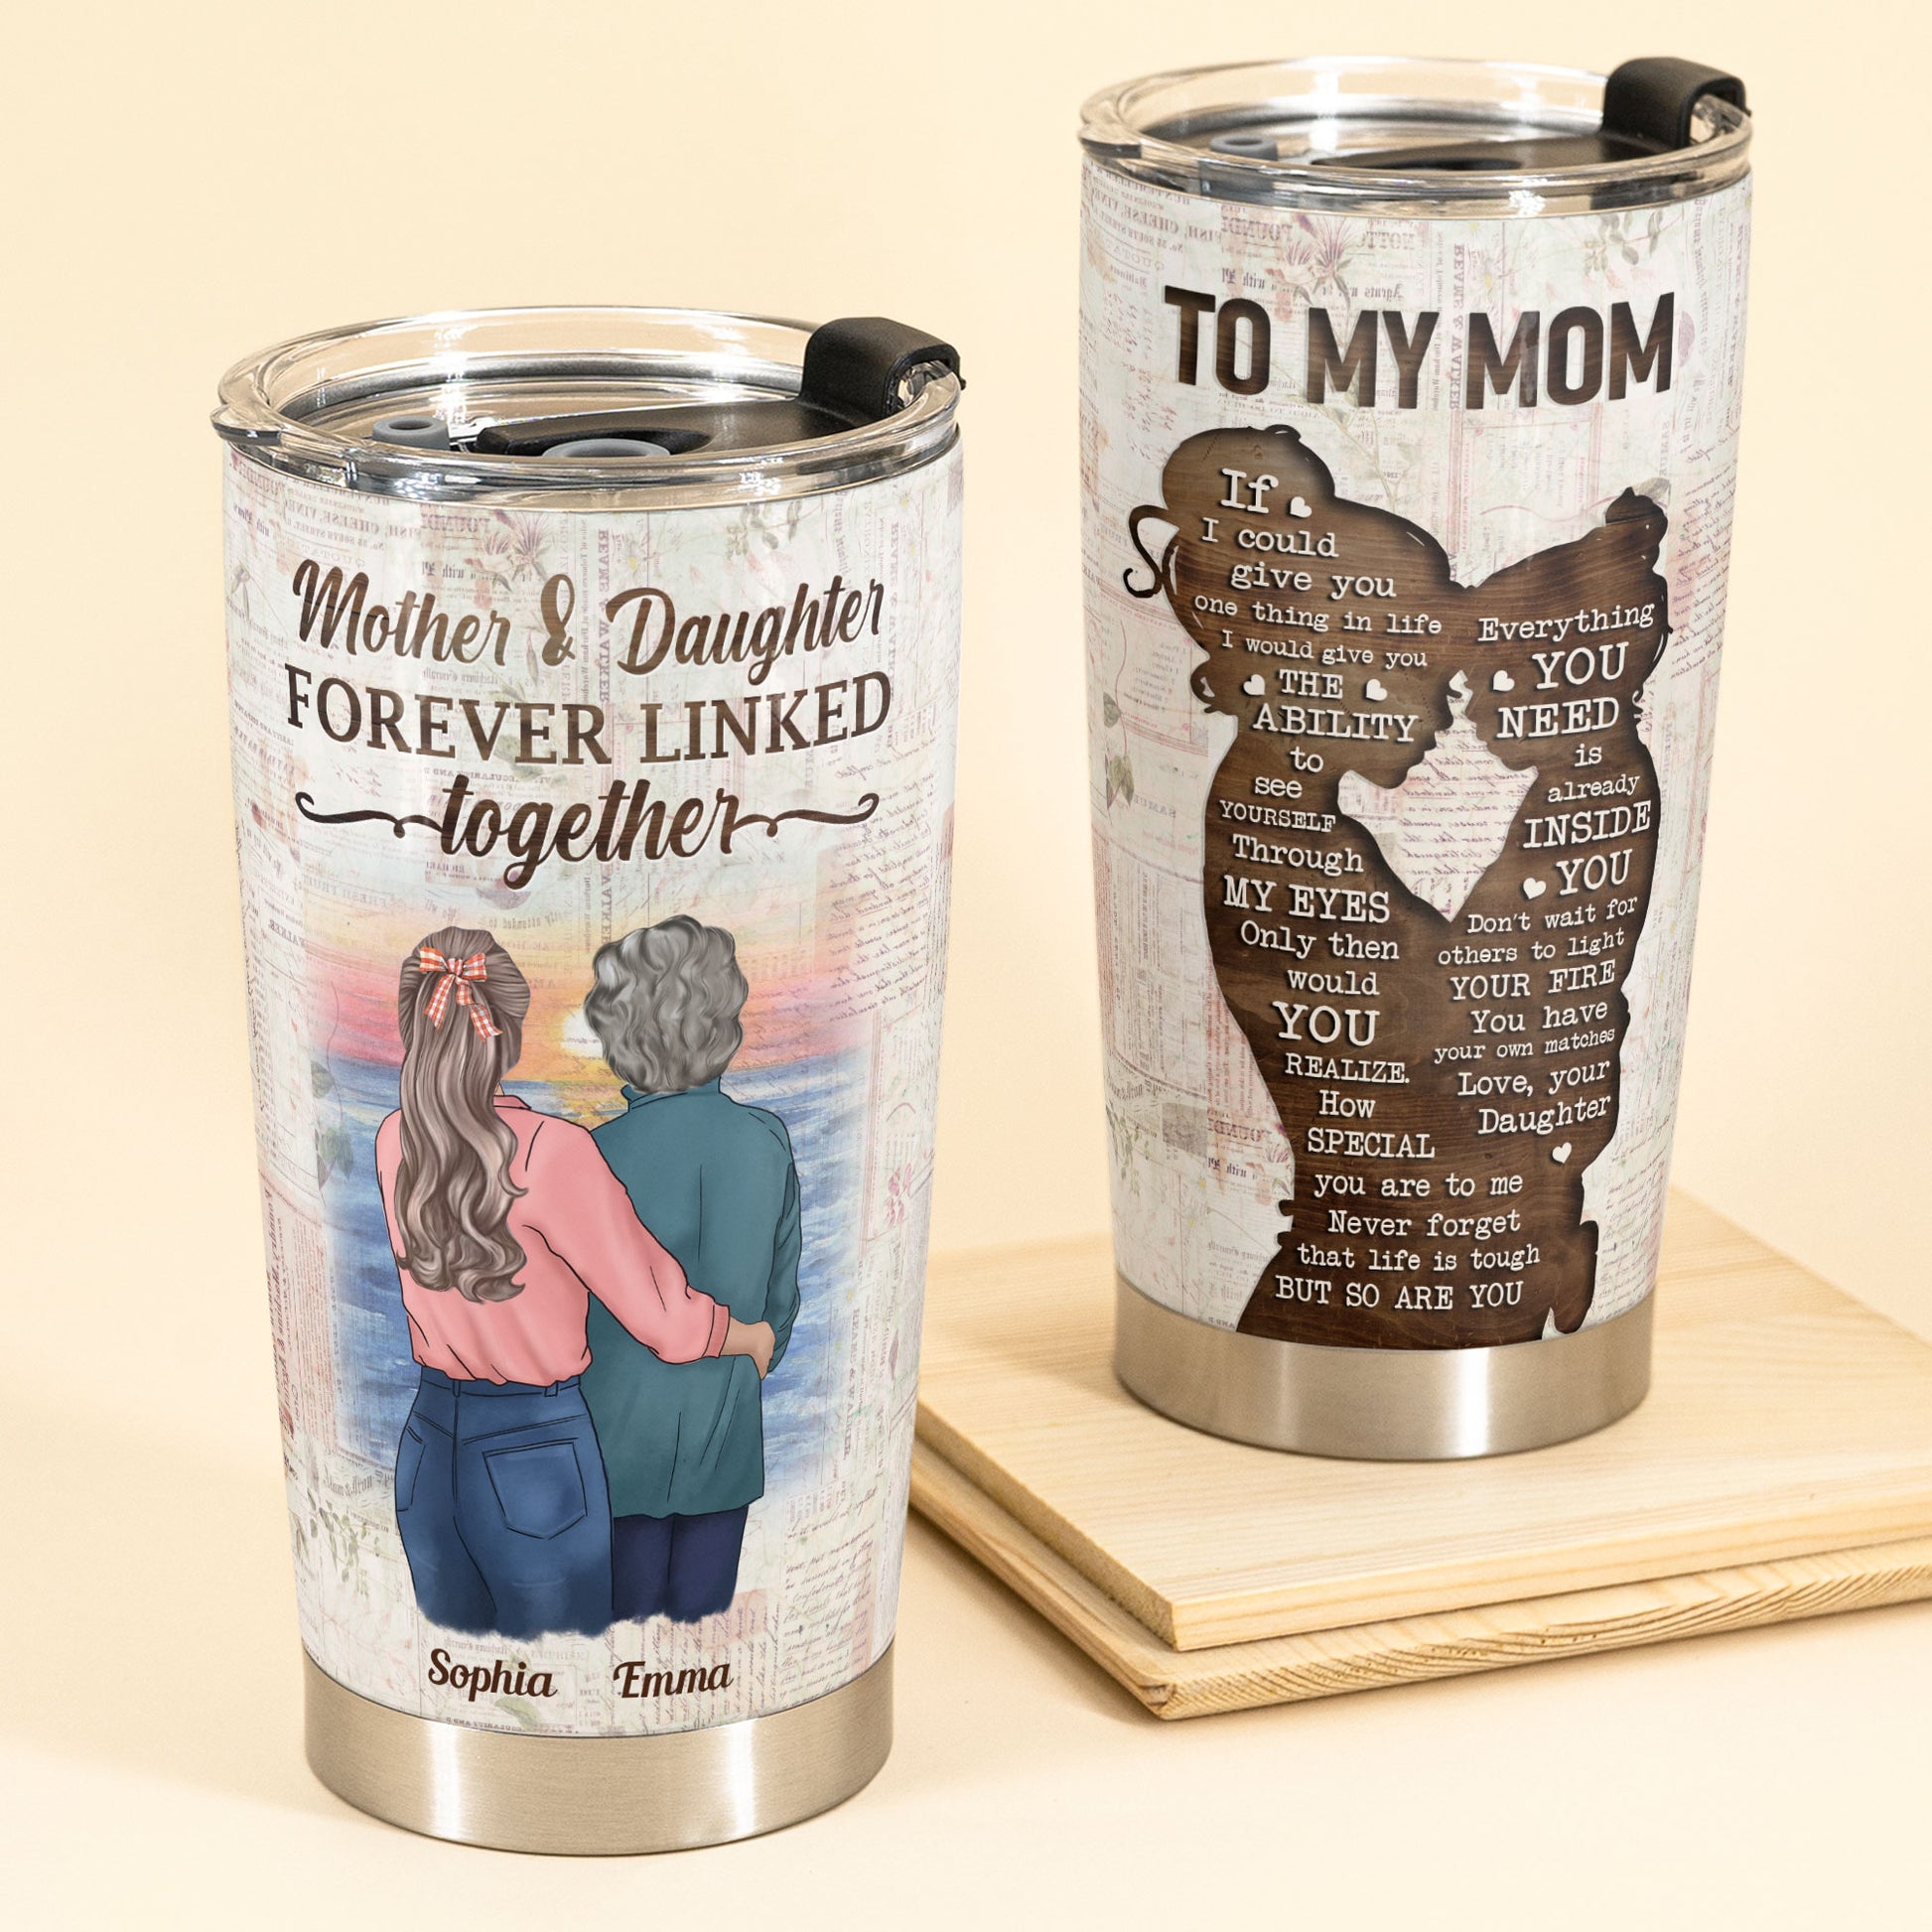 Mom Fuel Wine Tumbler Mom Fuel Tumbler for Mothers Day Mom Fuel Travel Mug  Tumbler Gift for Mom for Mothers Day Mom Bday Gift Mommy Wine Cup 